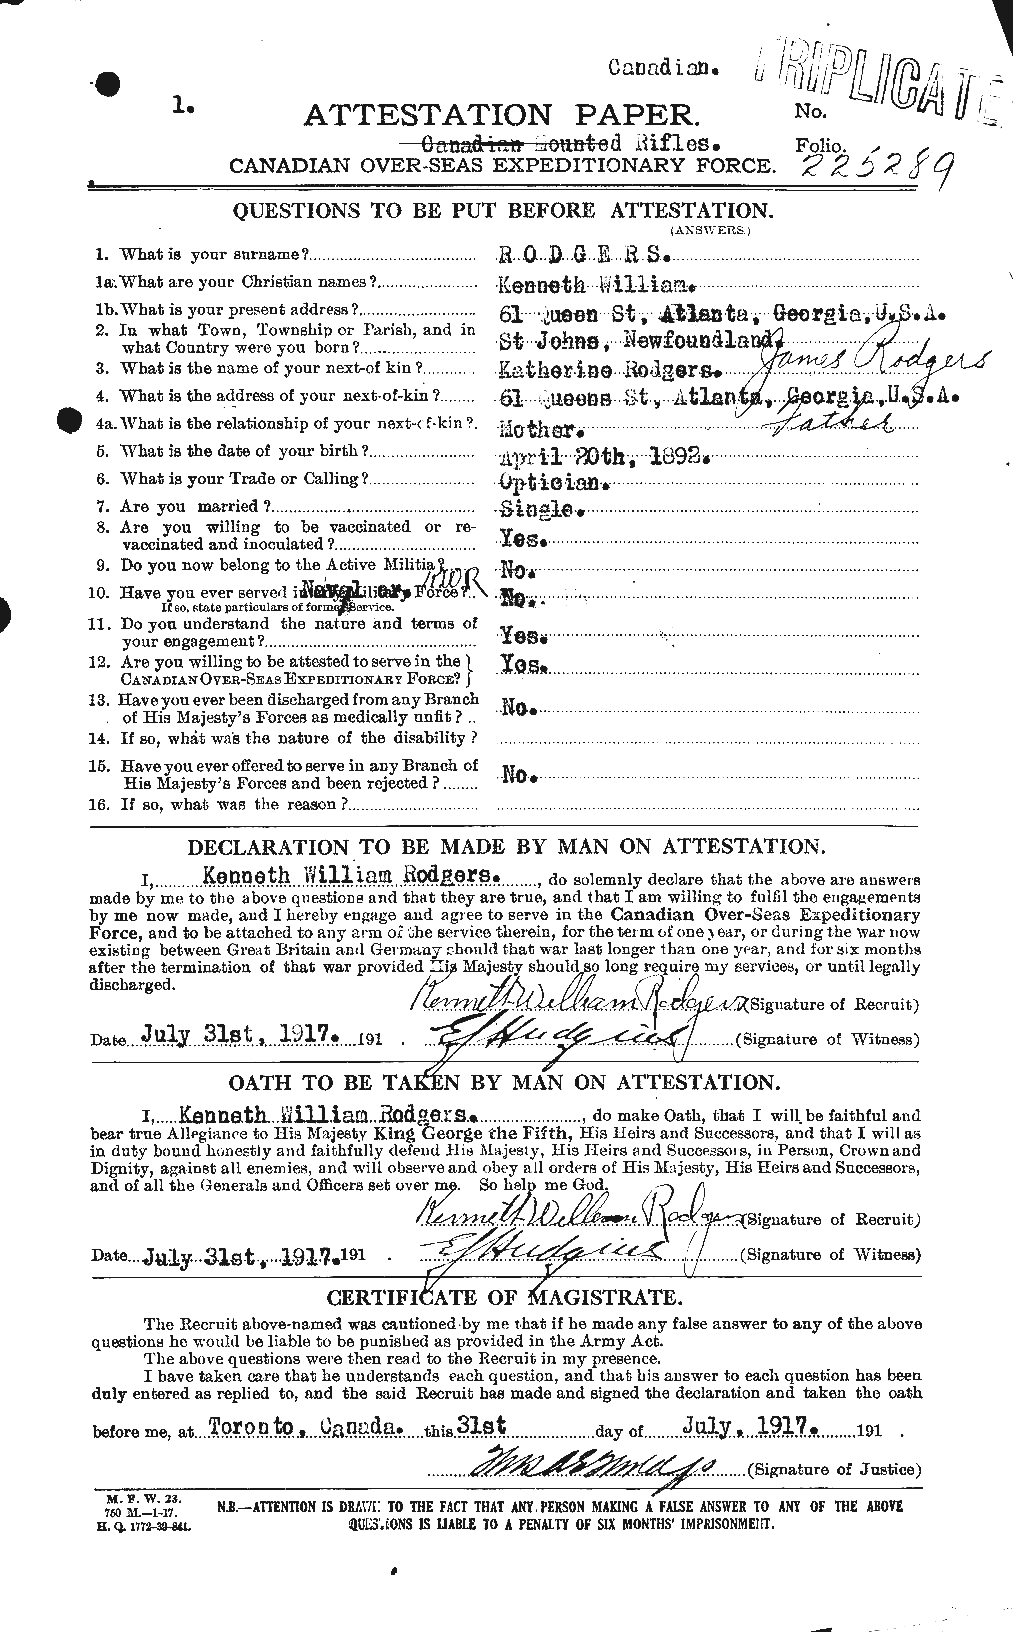 Personnel Records of the First World War - CEF 610439a